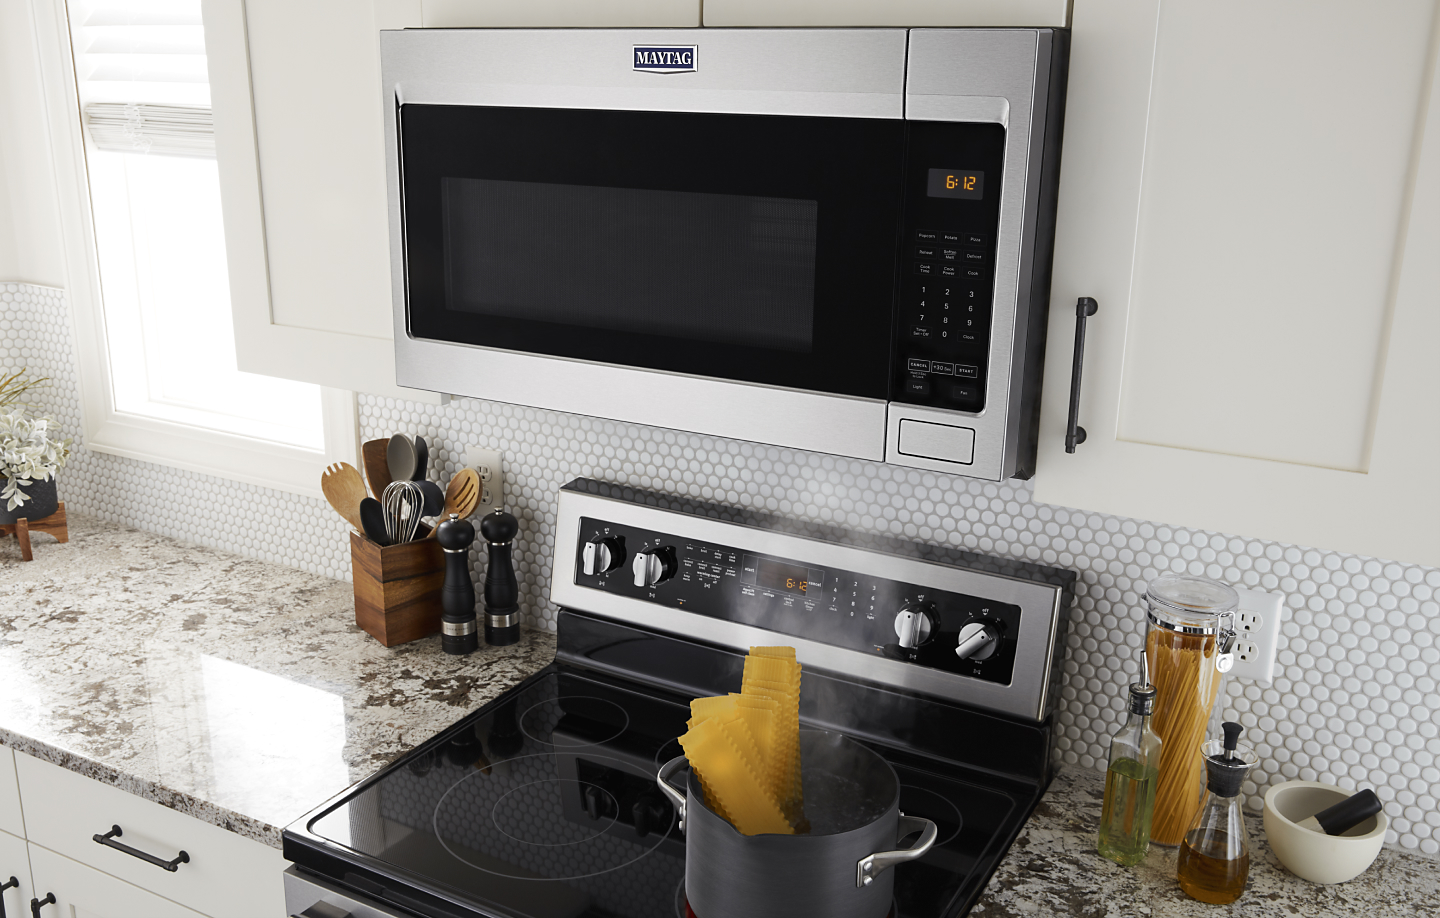 Maytag® over-the-range microwave above a Maytag® range set in white cabinetry